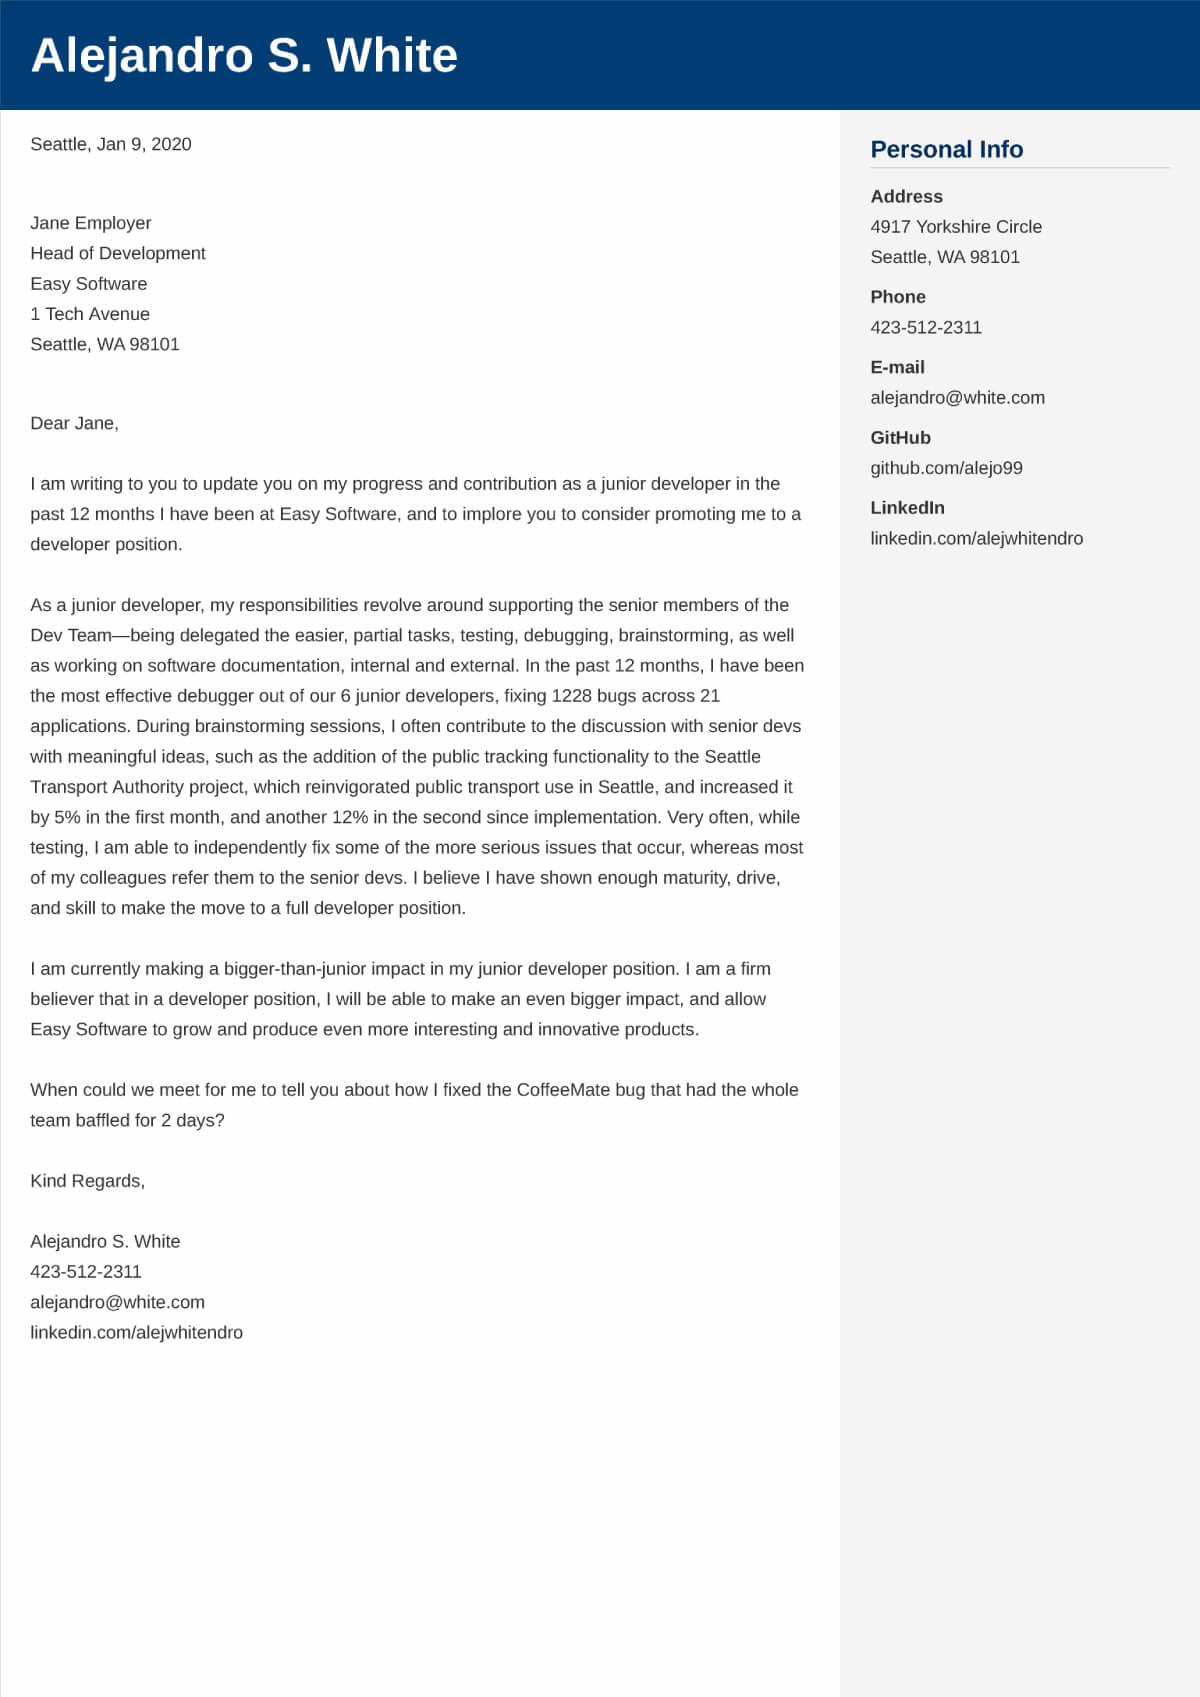 example email cover letter for internal position